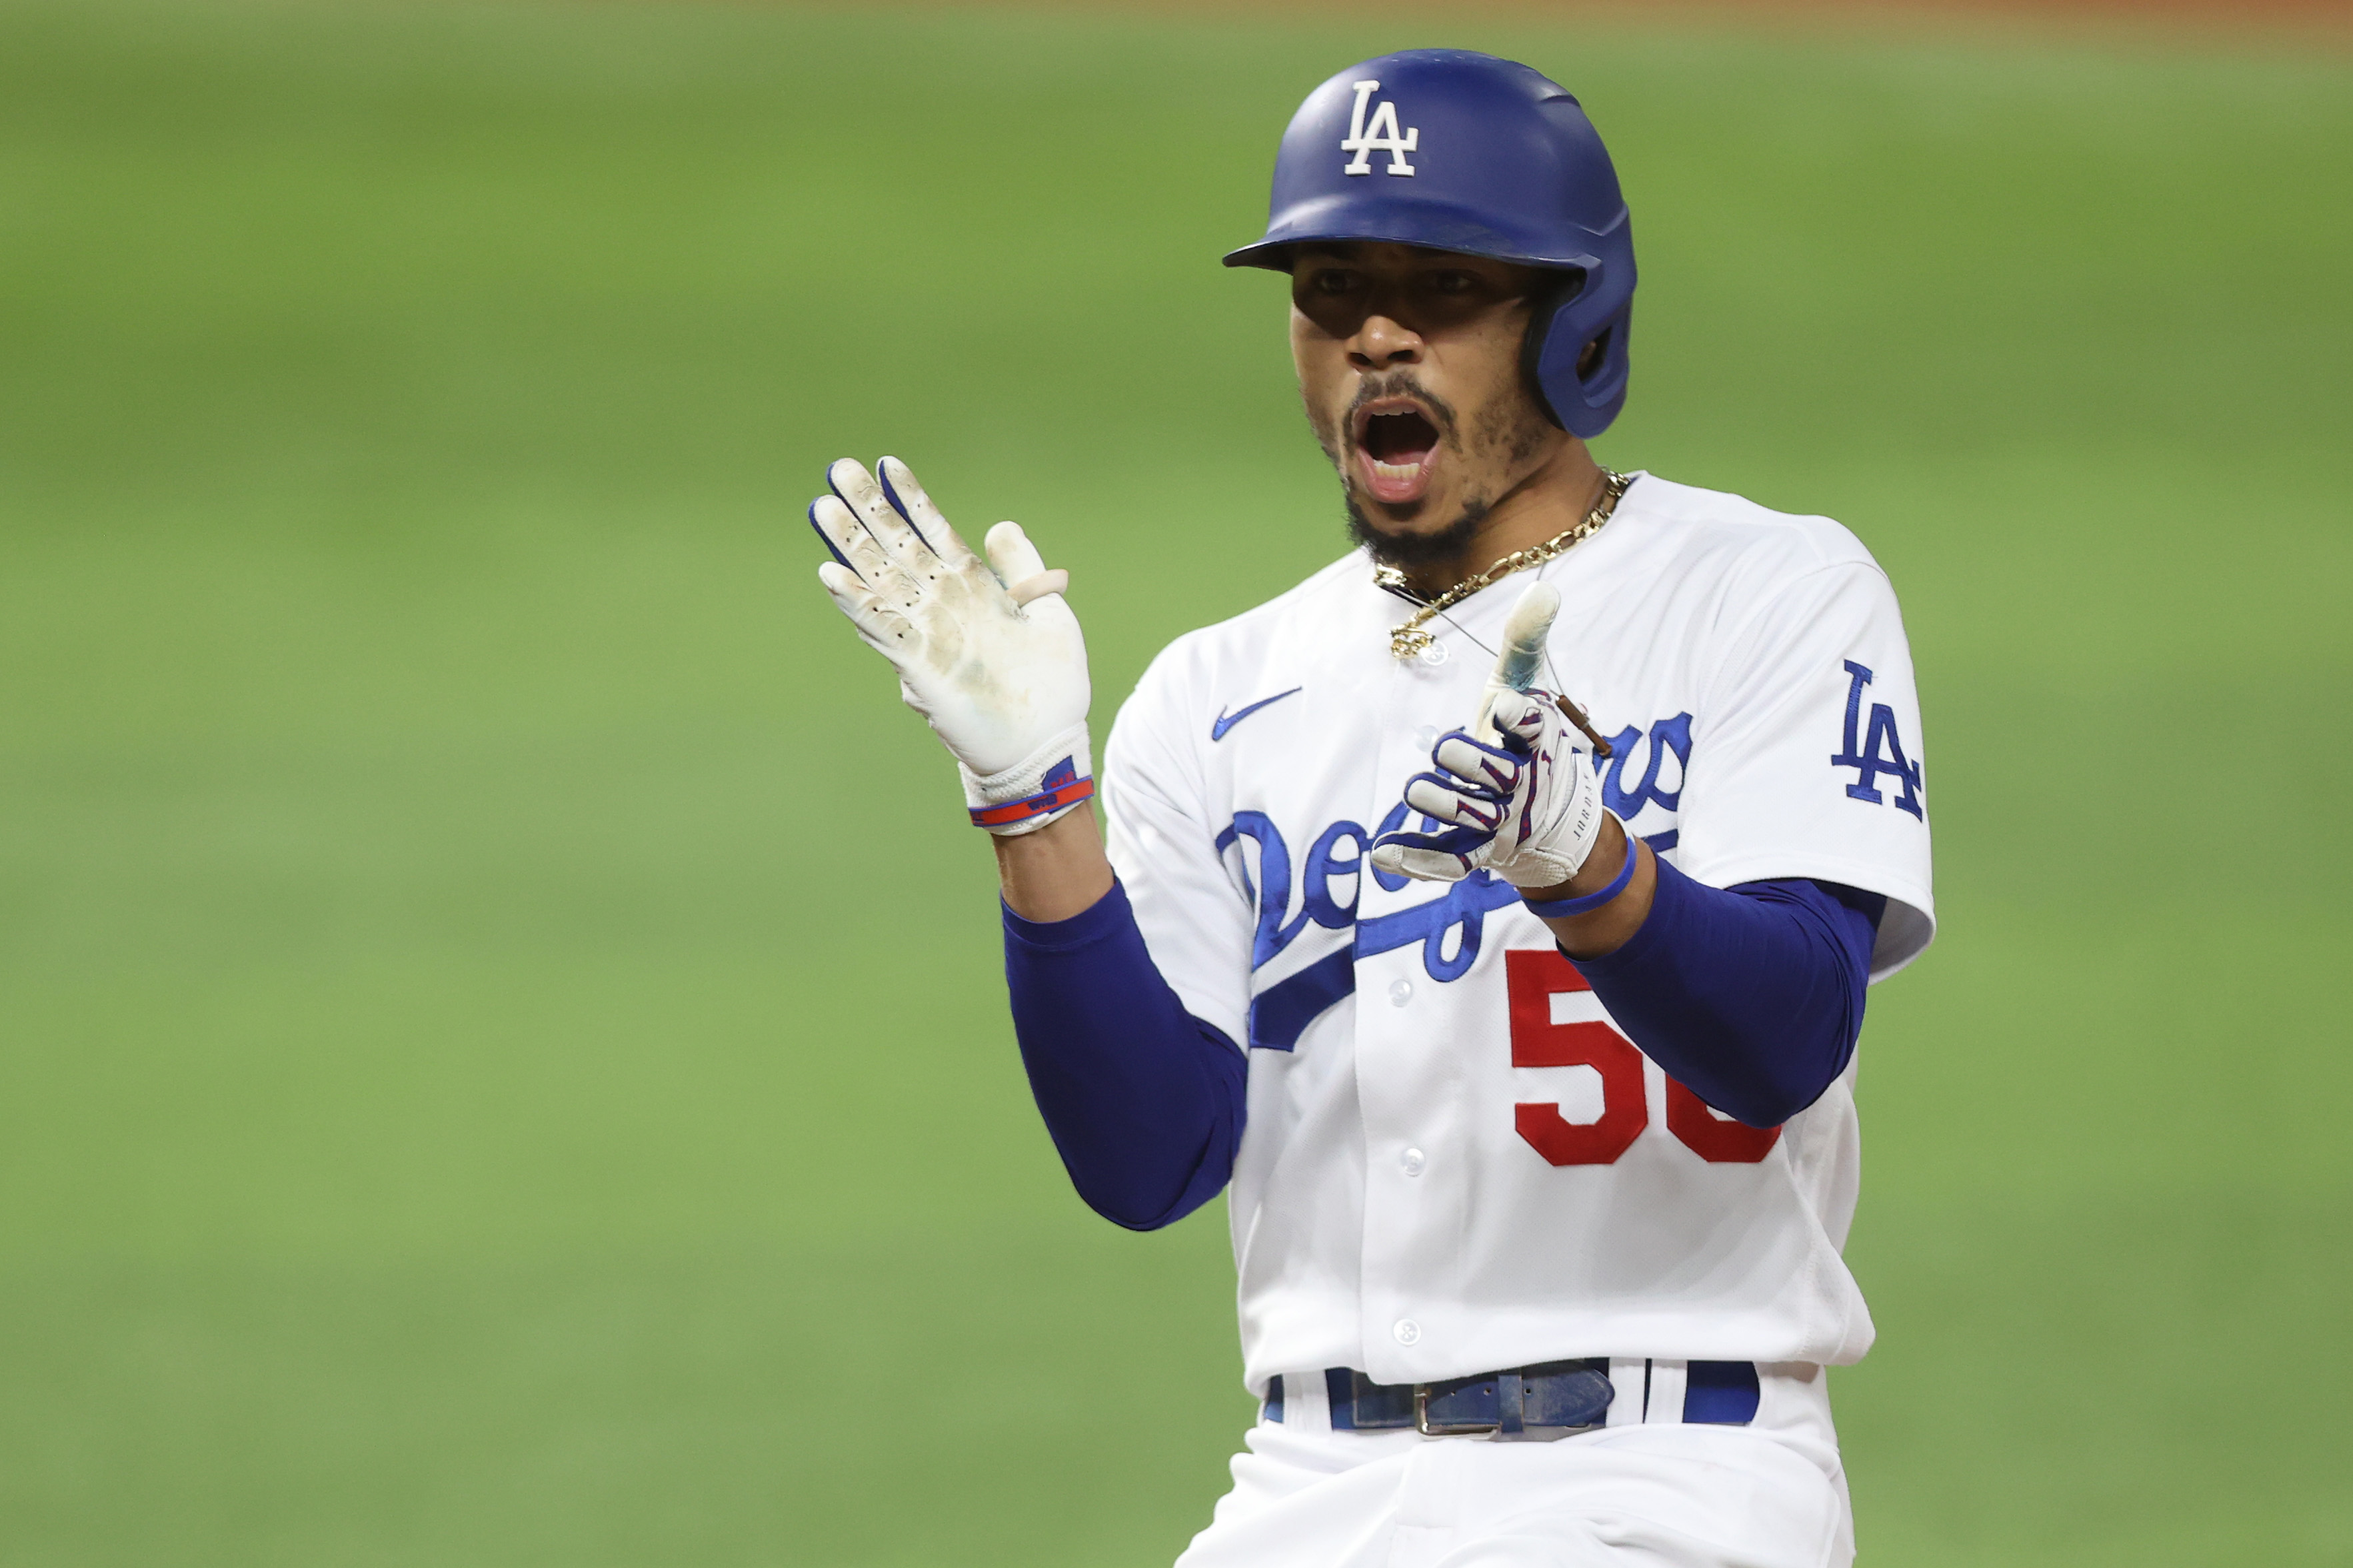 The Red Sox Rightfully Trolled the Dodgers Over Mookie Betts' Contract